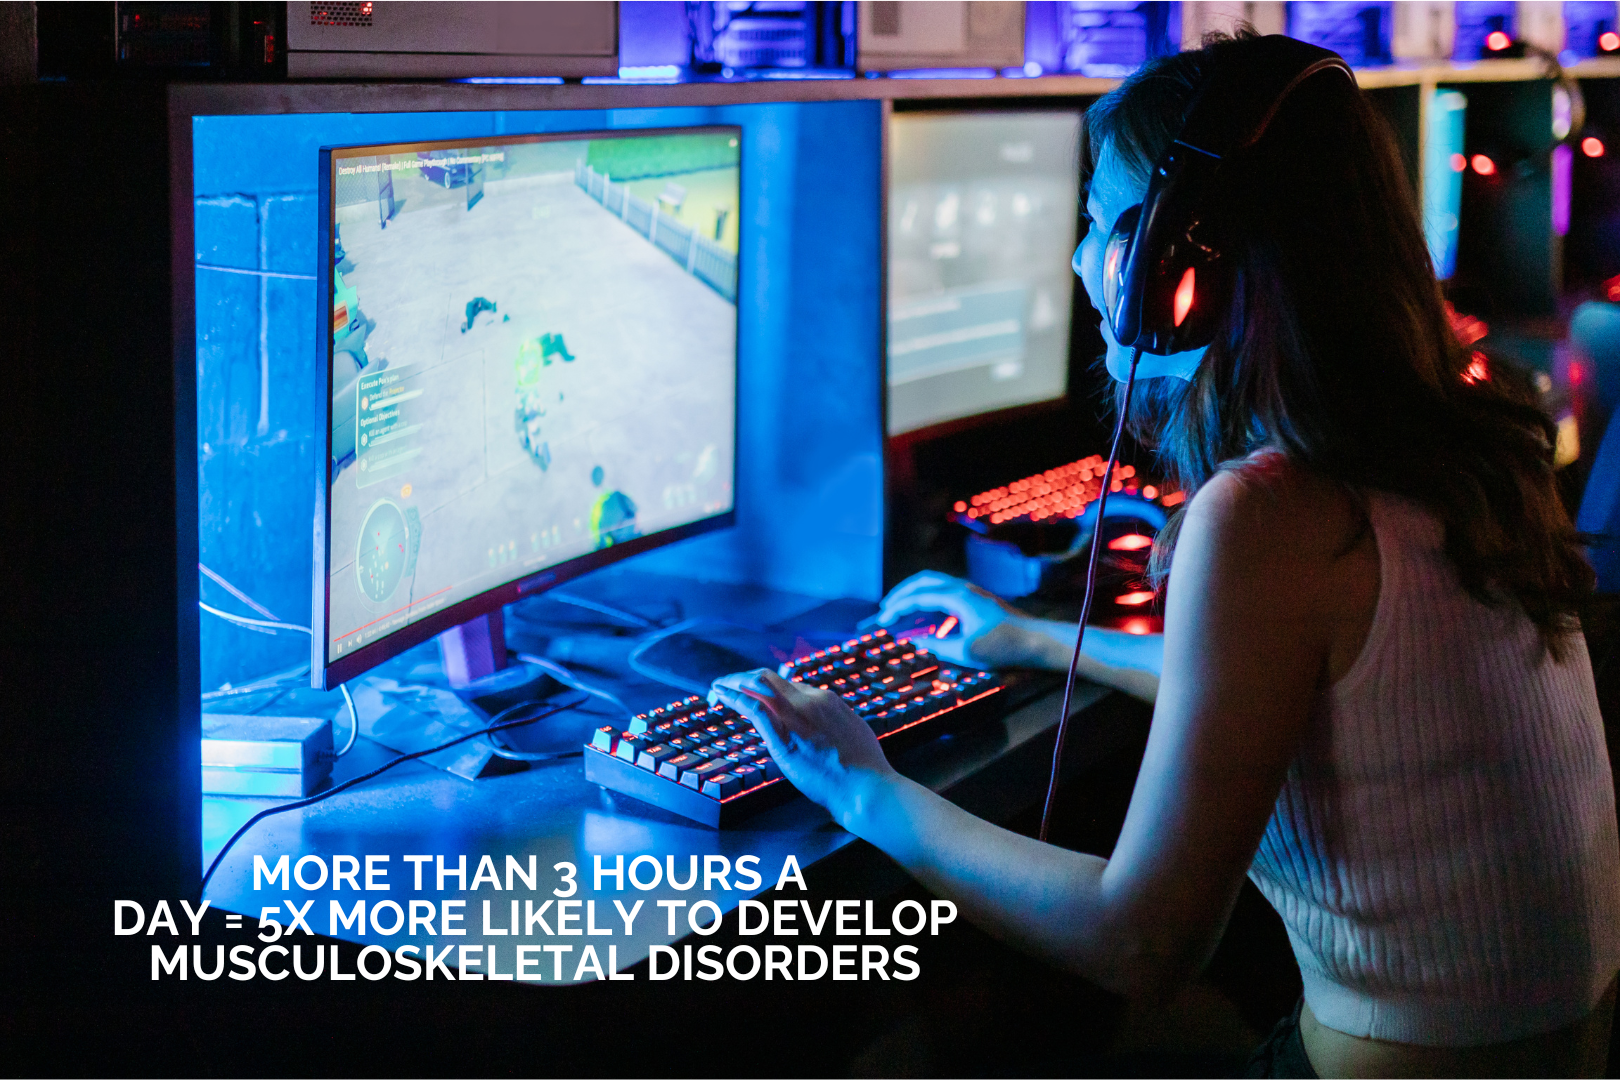 gamers who play more than 3 hours per day increase their odds of developing musculoskeletal disorders by more than 5X?